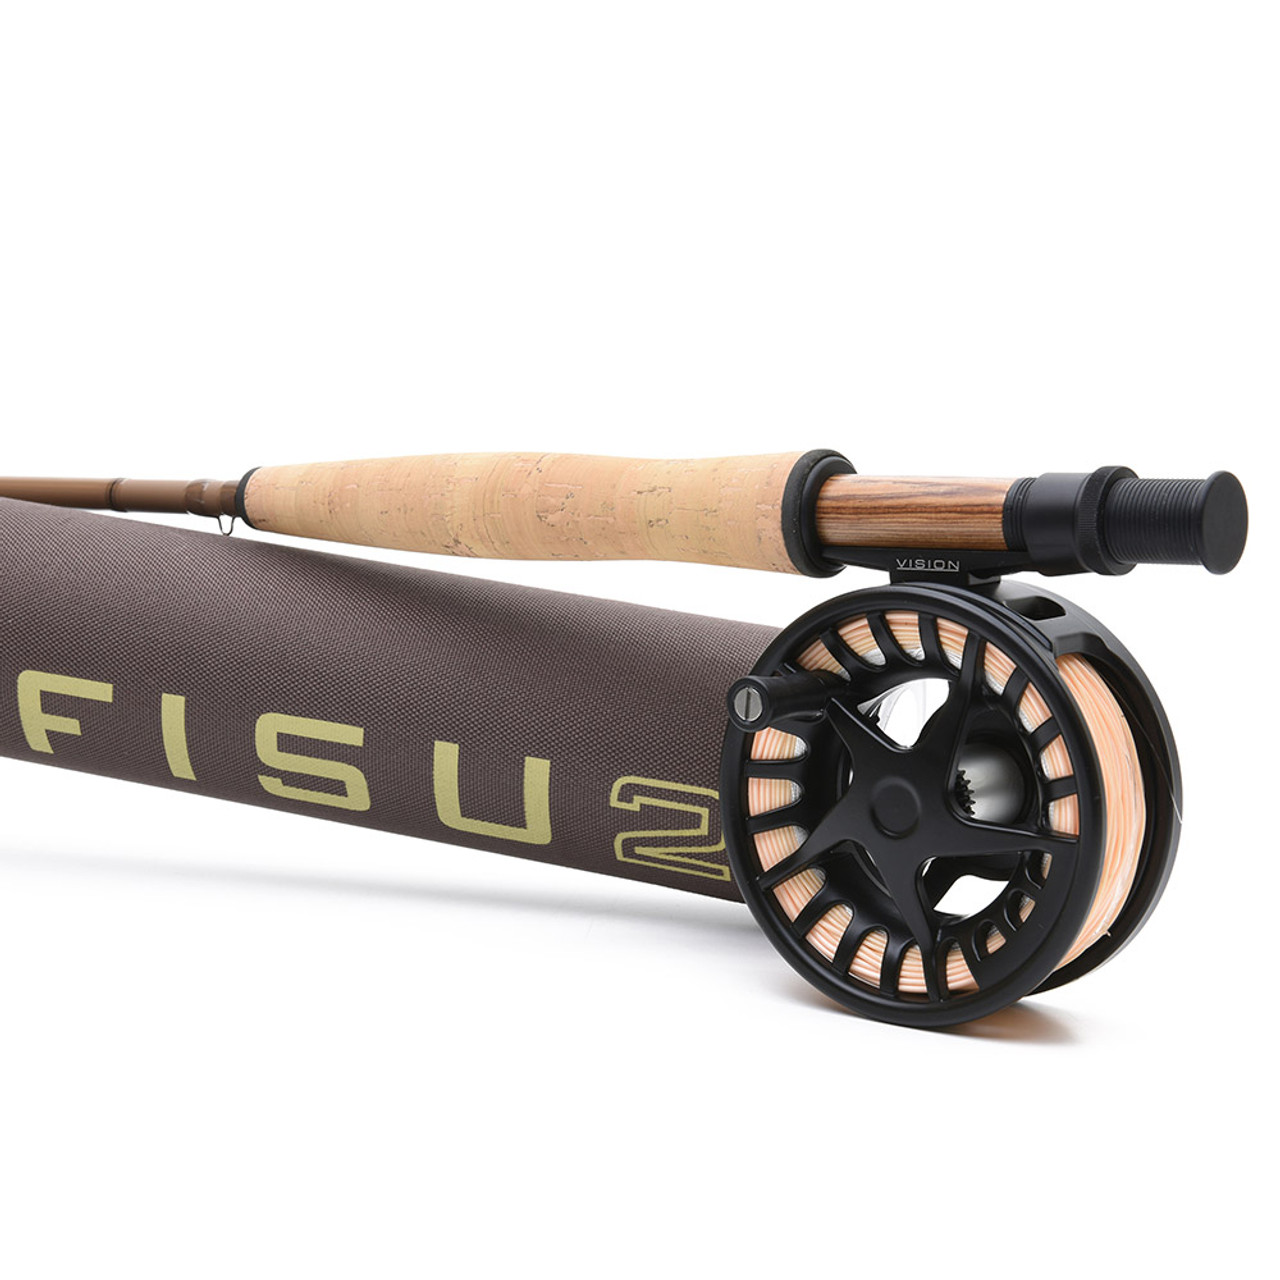 Vision Fisu 2 Rod and Reel Set 9' 5 Weight - Armadale Angling